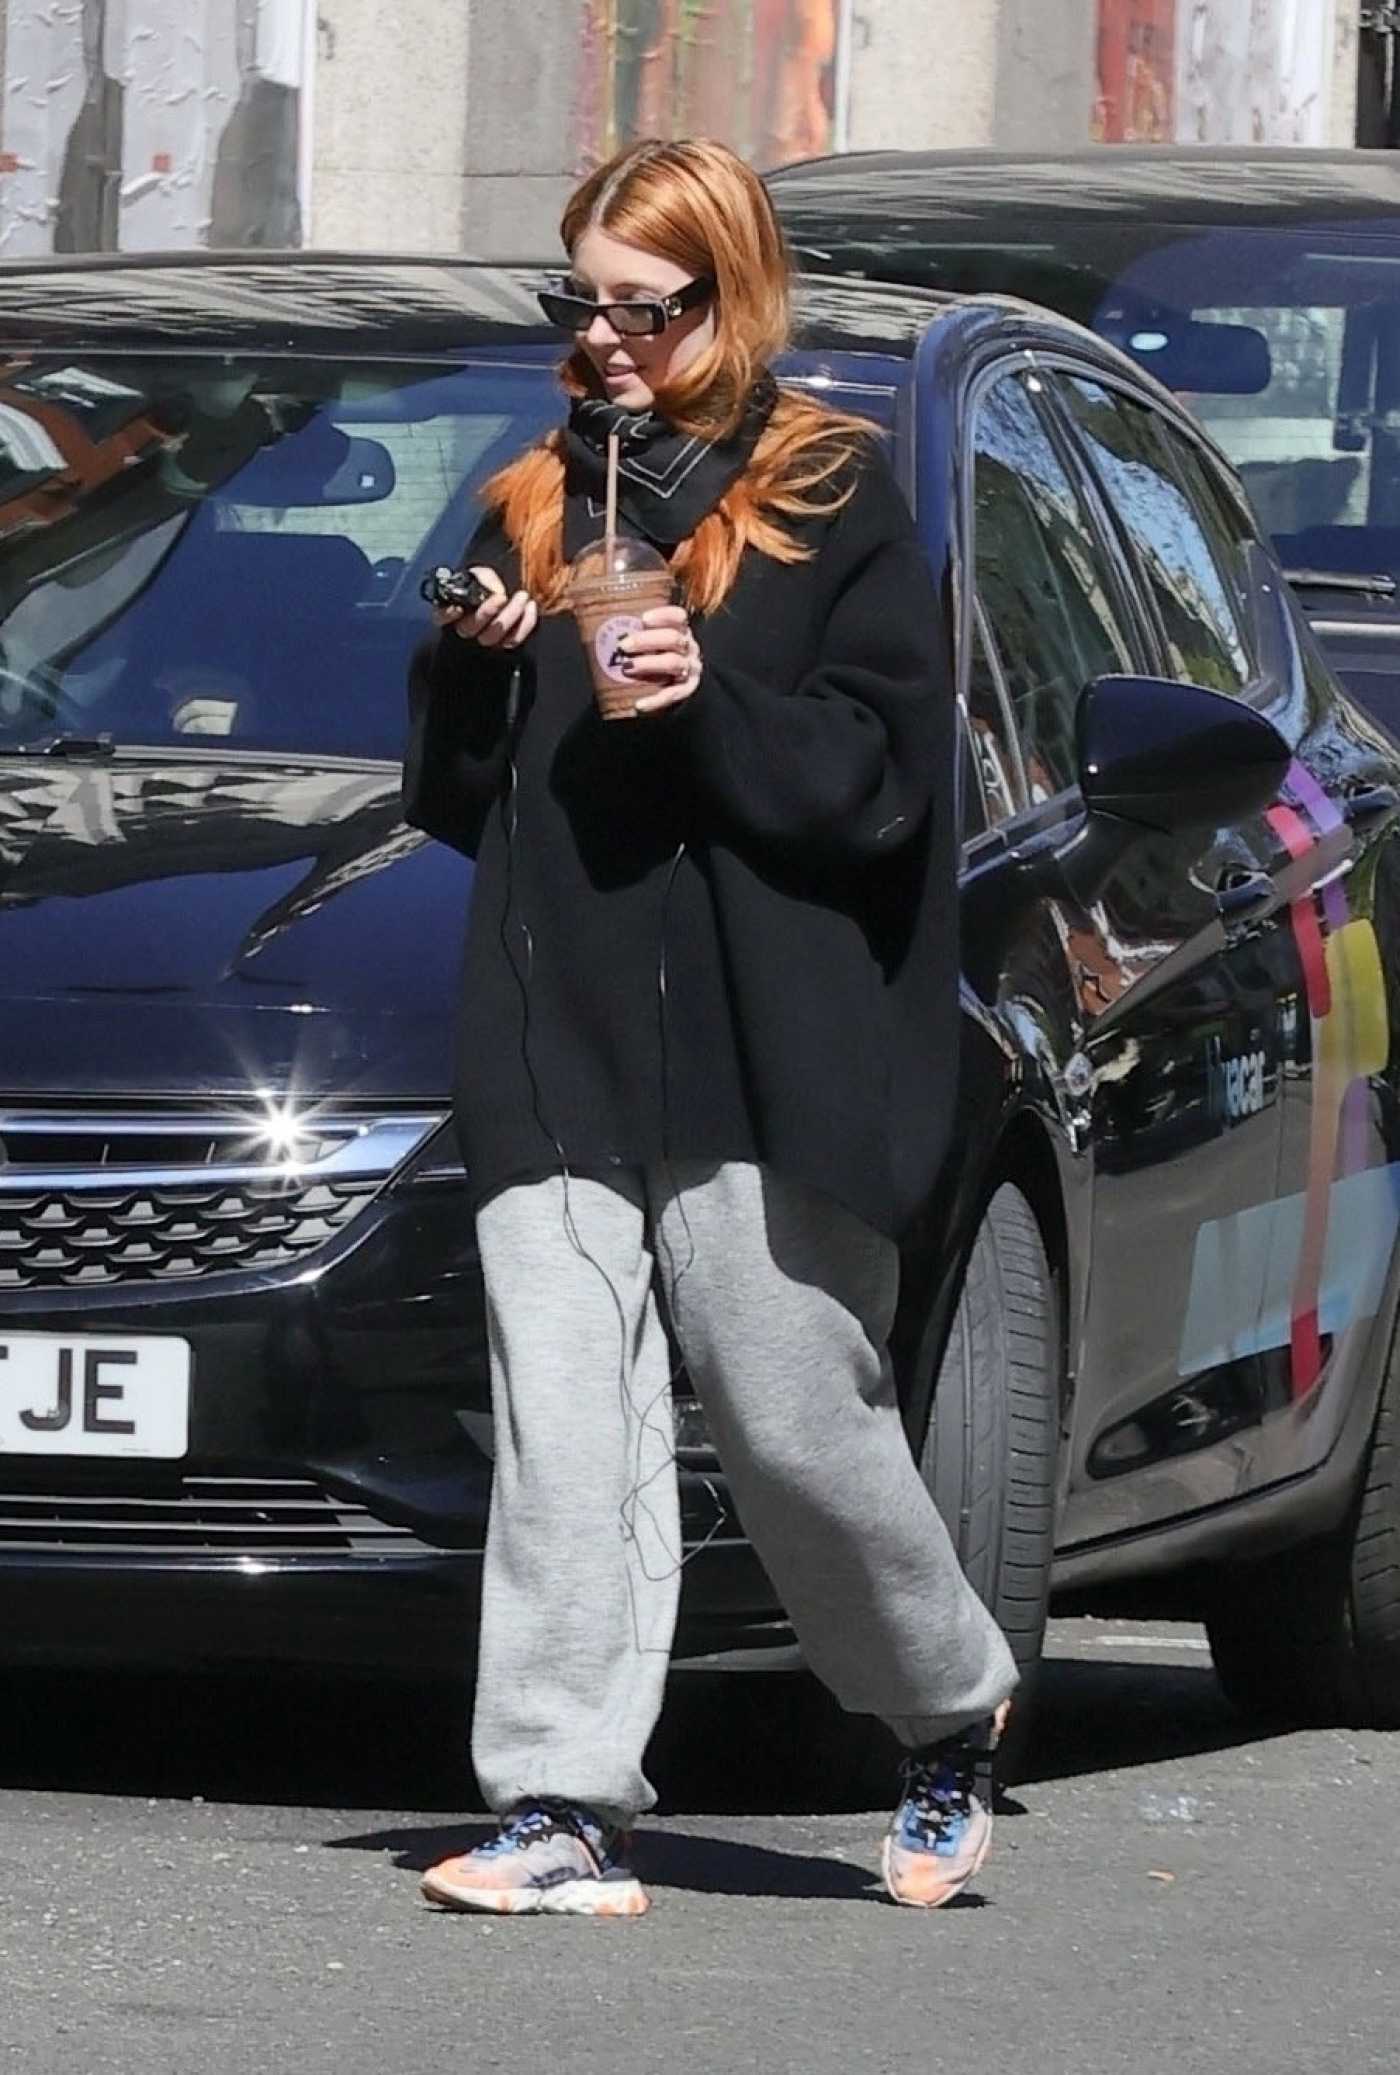 Stacey Dooley in a Grey Sweatpants Was Seen After Appearing on Radio 5Live in London 04/18/2021